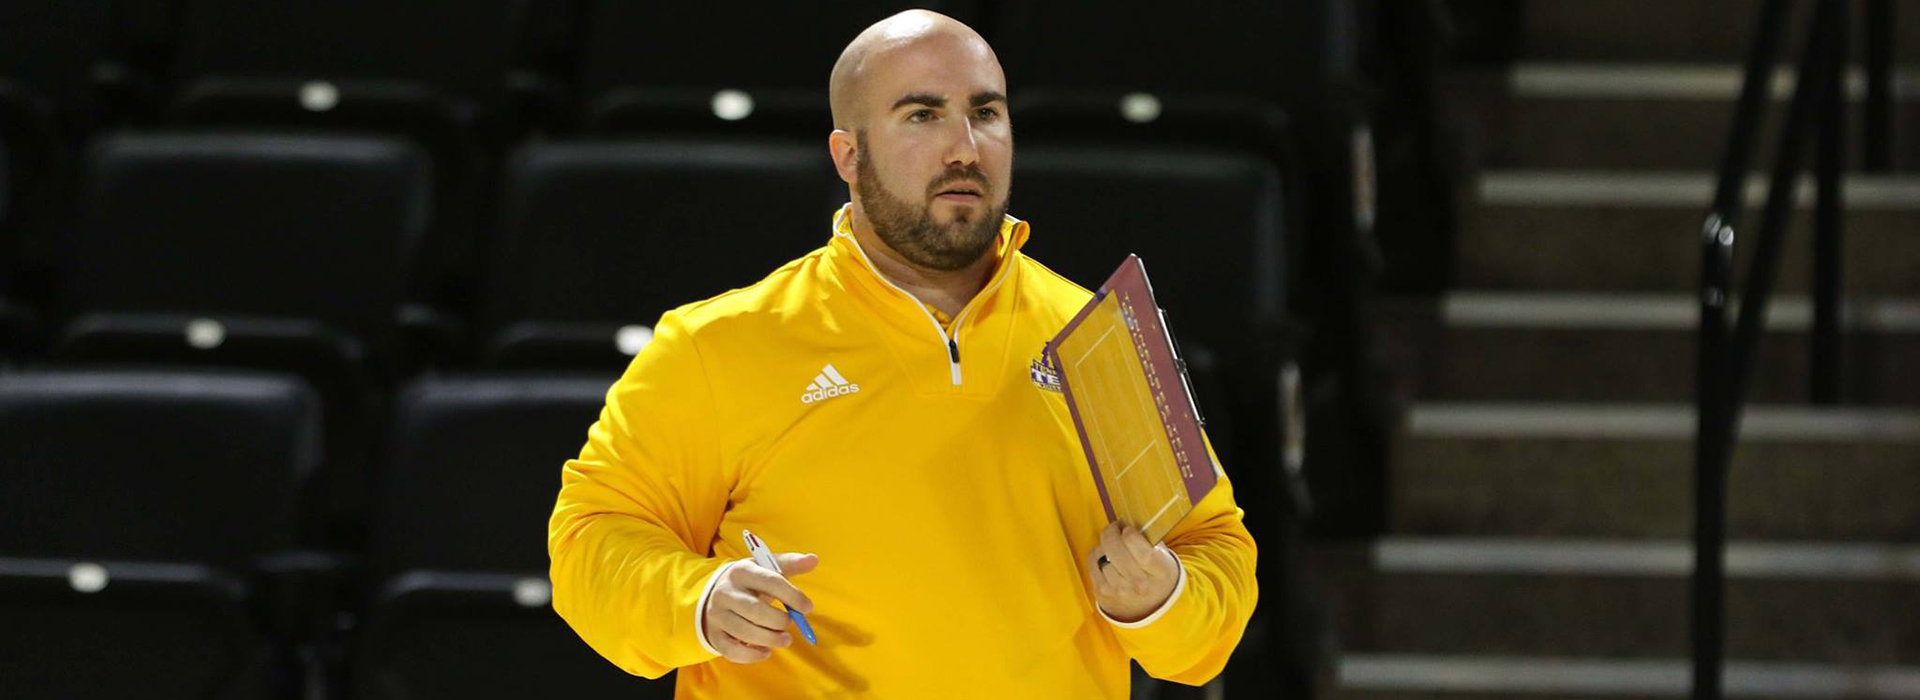 Tech volleyball's Zach Weinberg promoted to associate head coach